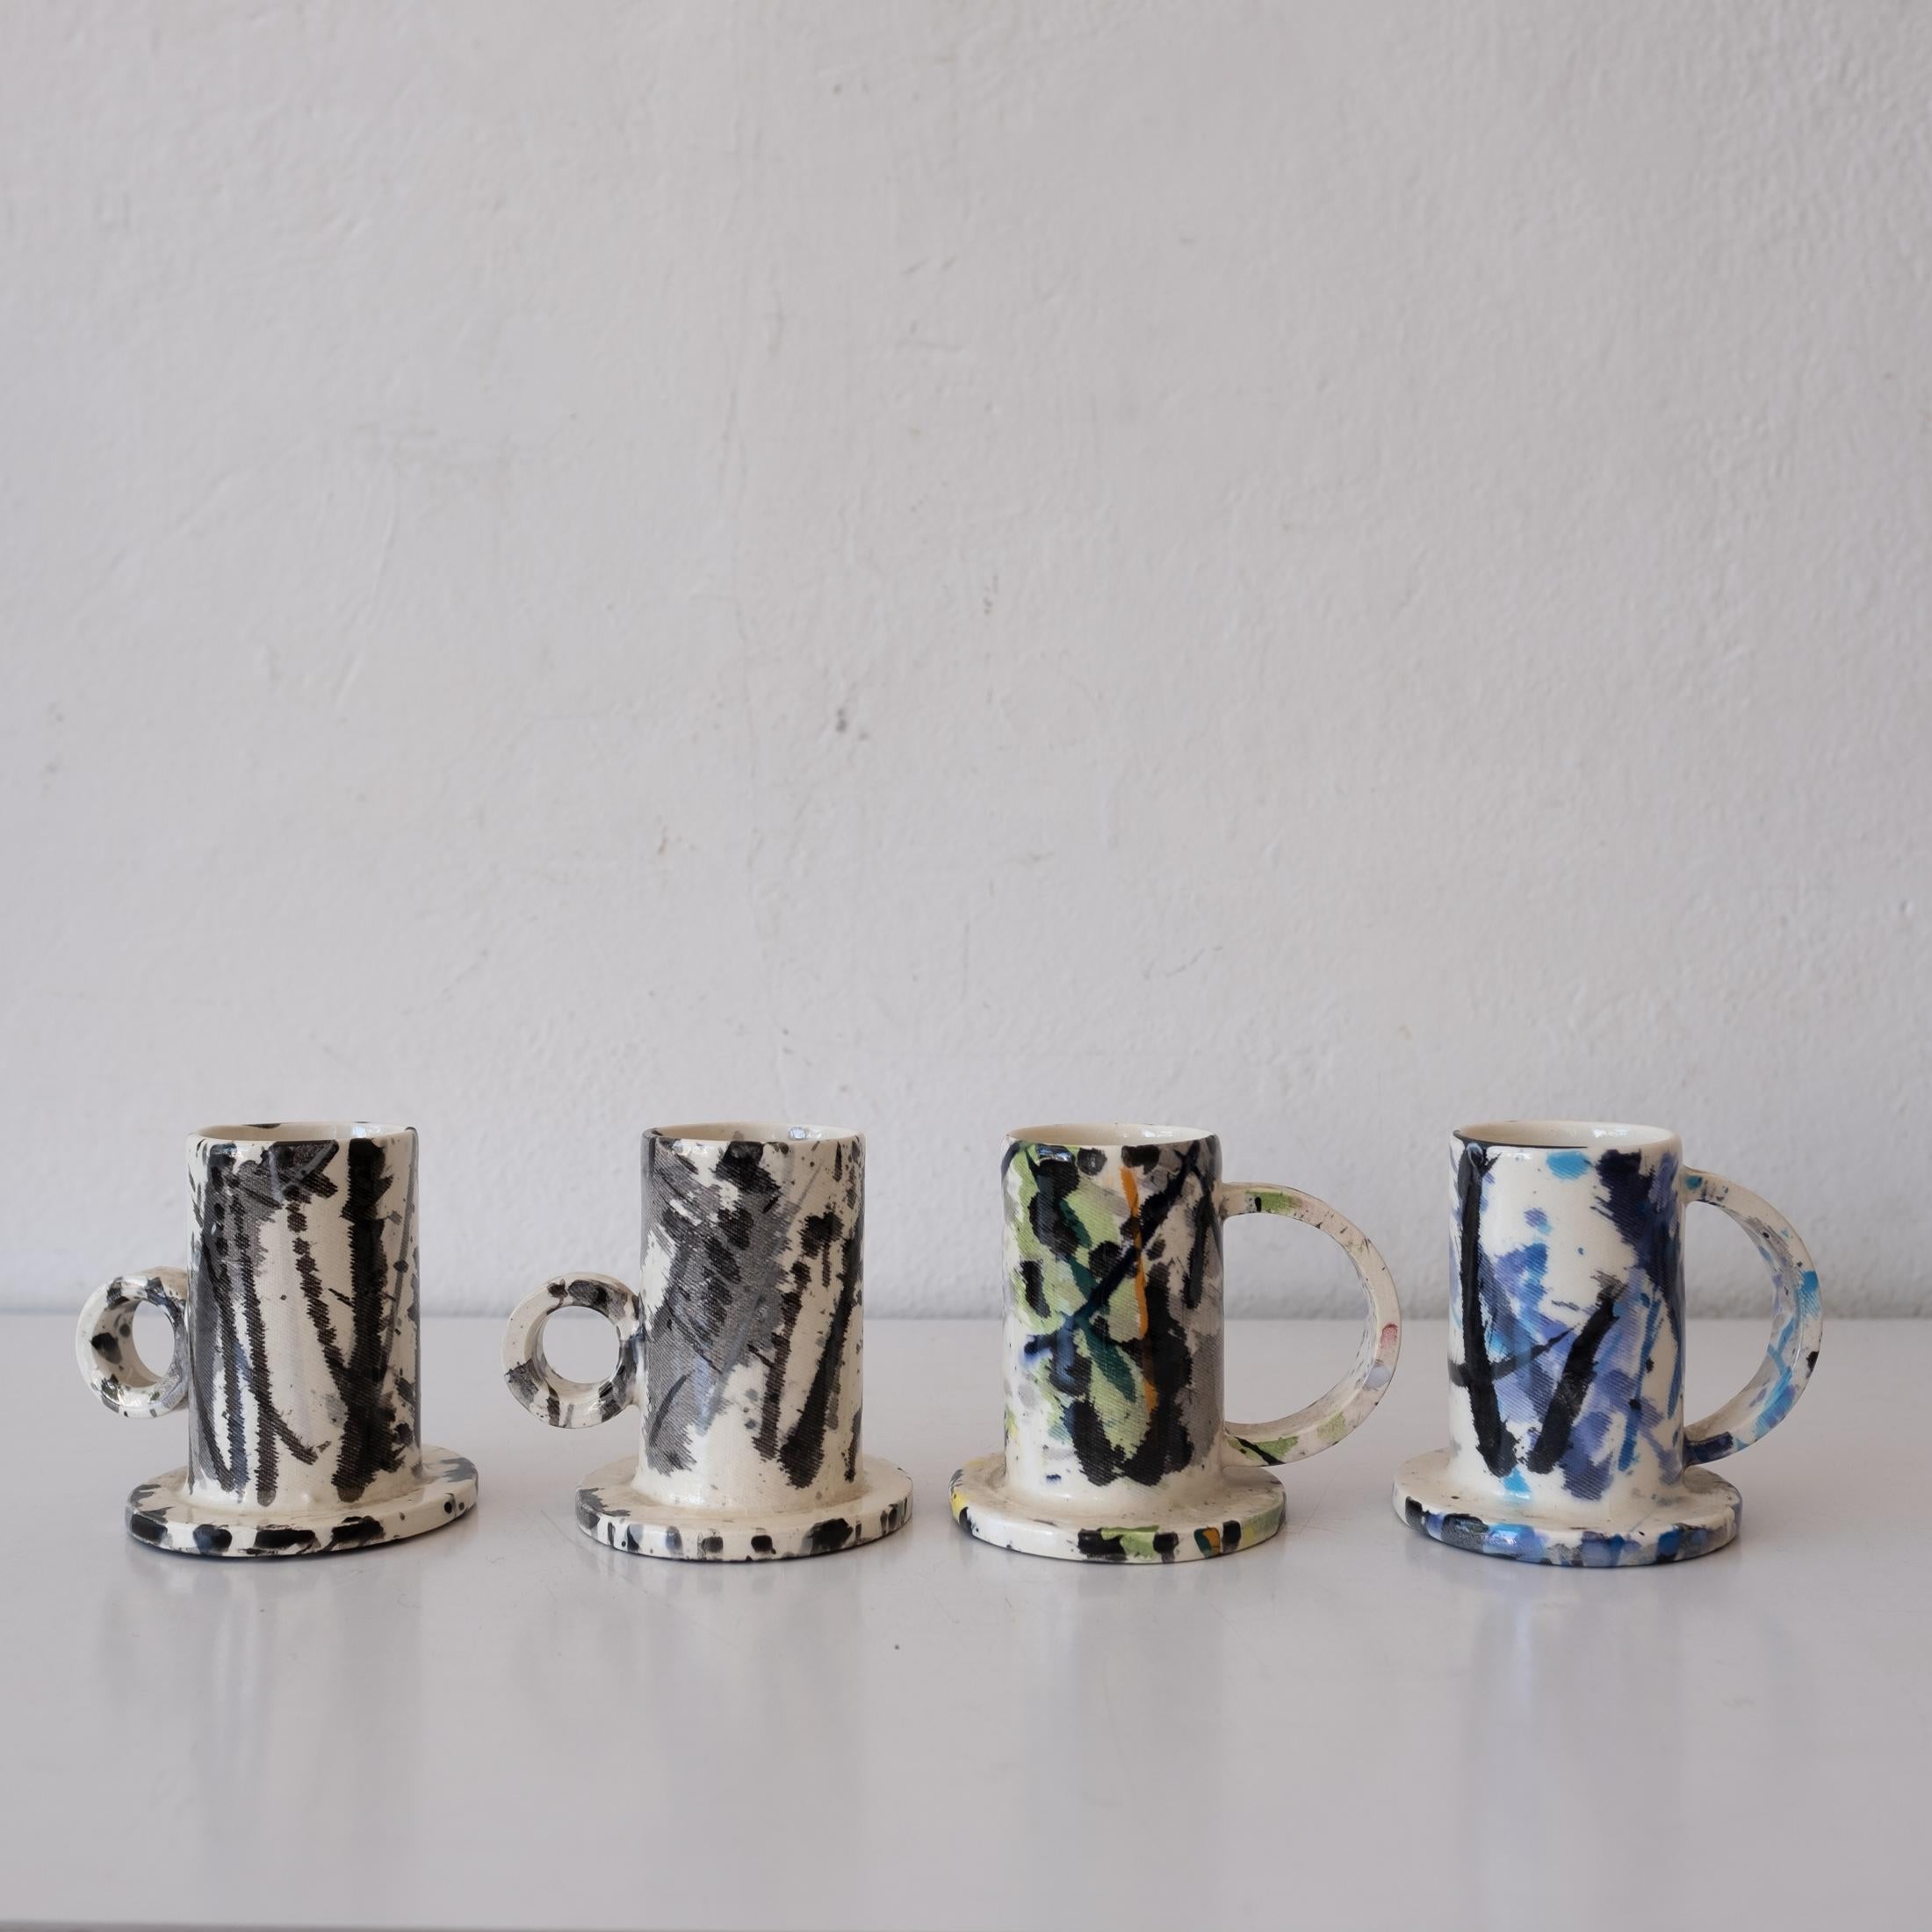 A really great set of ceramic love cups by Peter Shire, a Los Angeles-based artist and founding member of The Memphis Group. Signed 